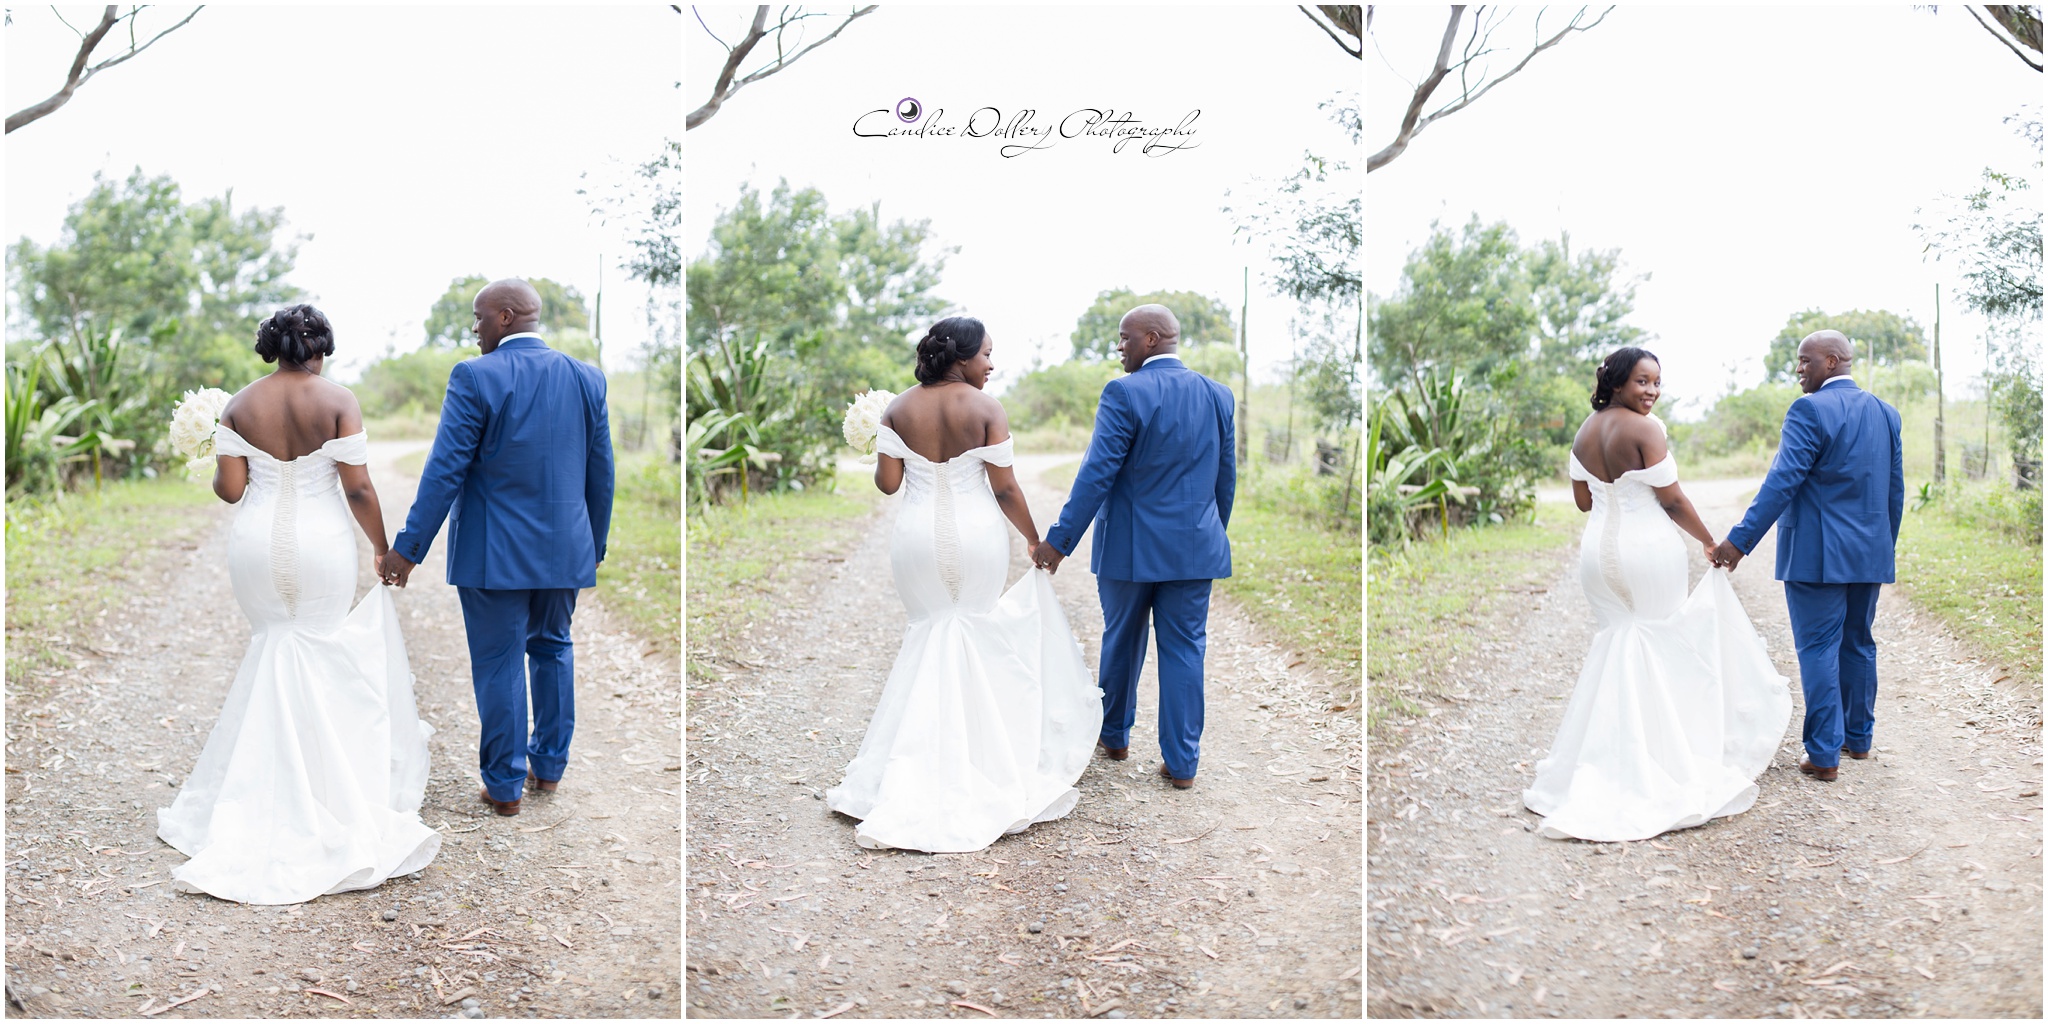 Thembi & Sabelo's Wedding - Candice Dollery Photography_8307